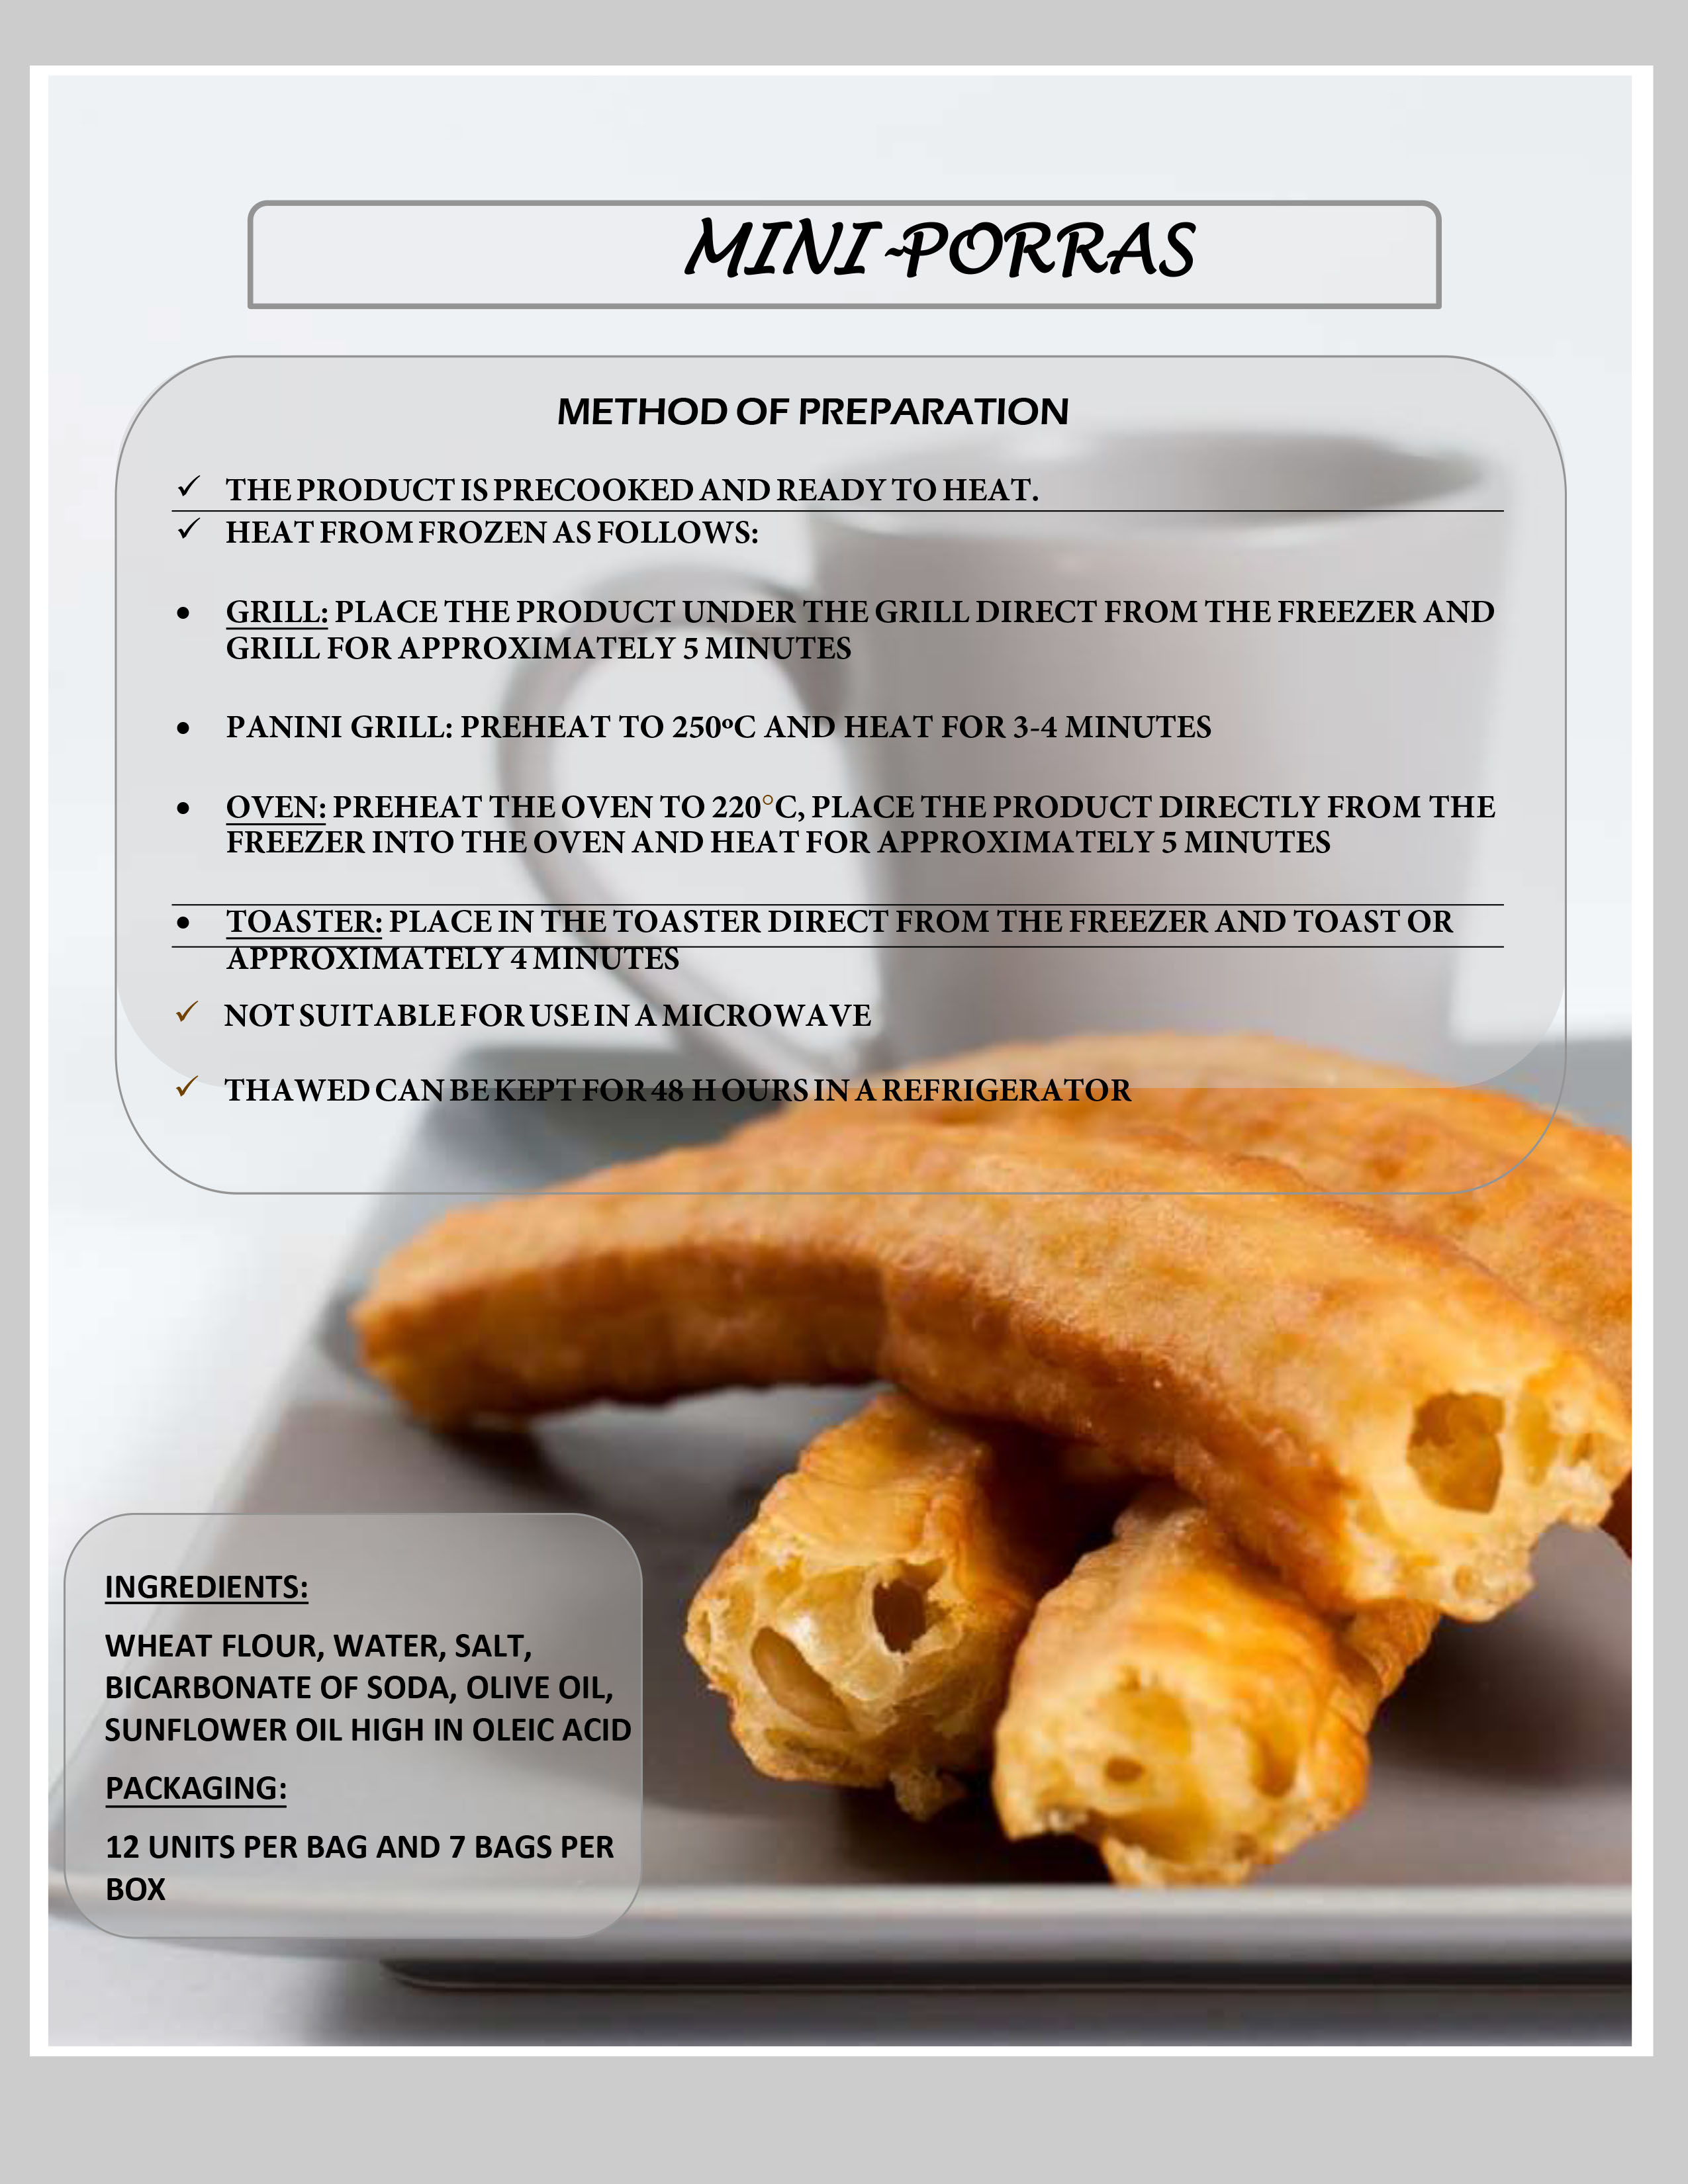 Porras - Information and Cooking Instructions